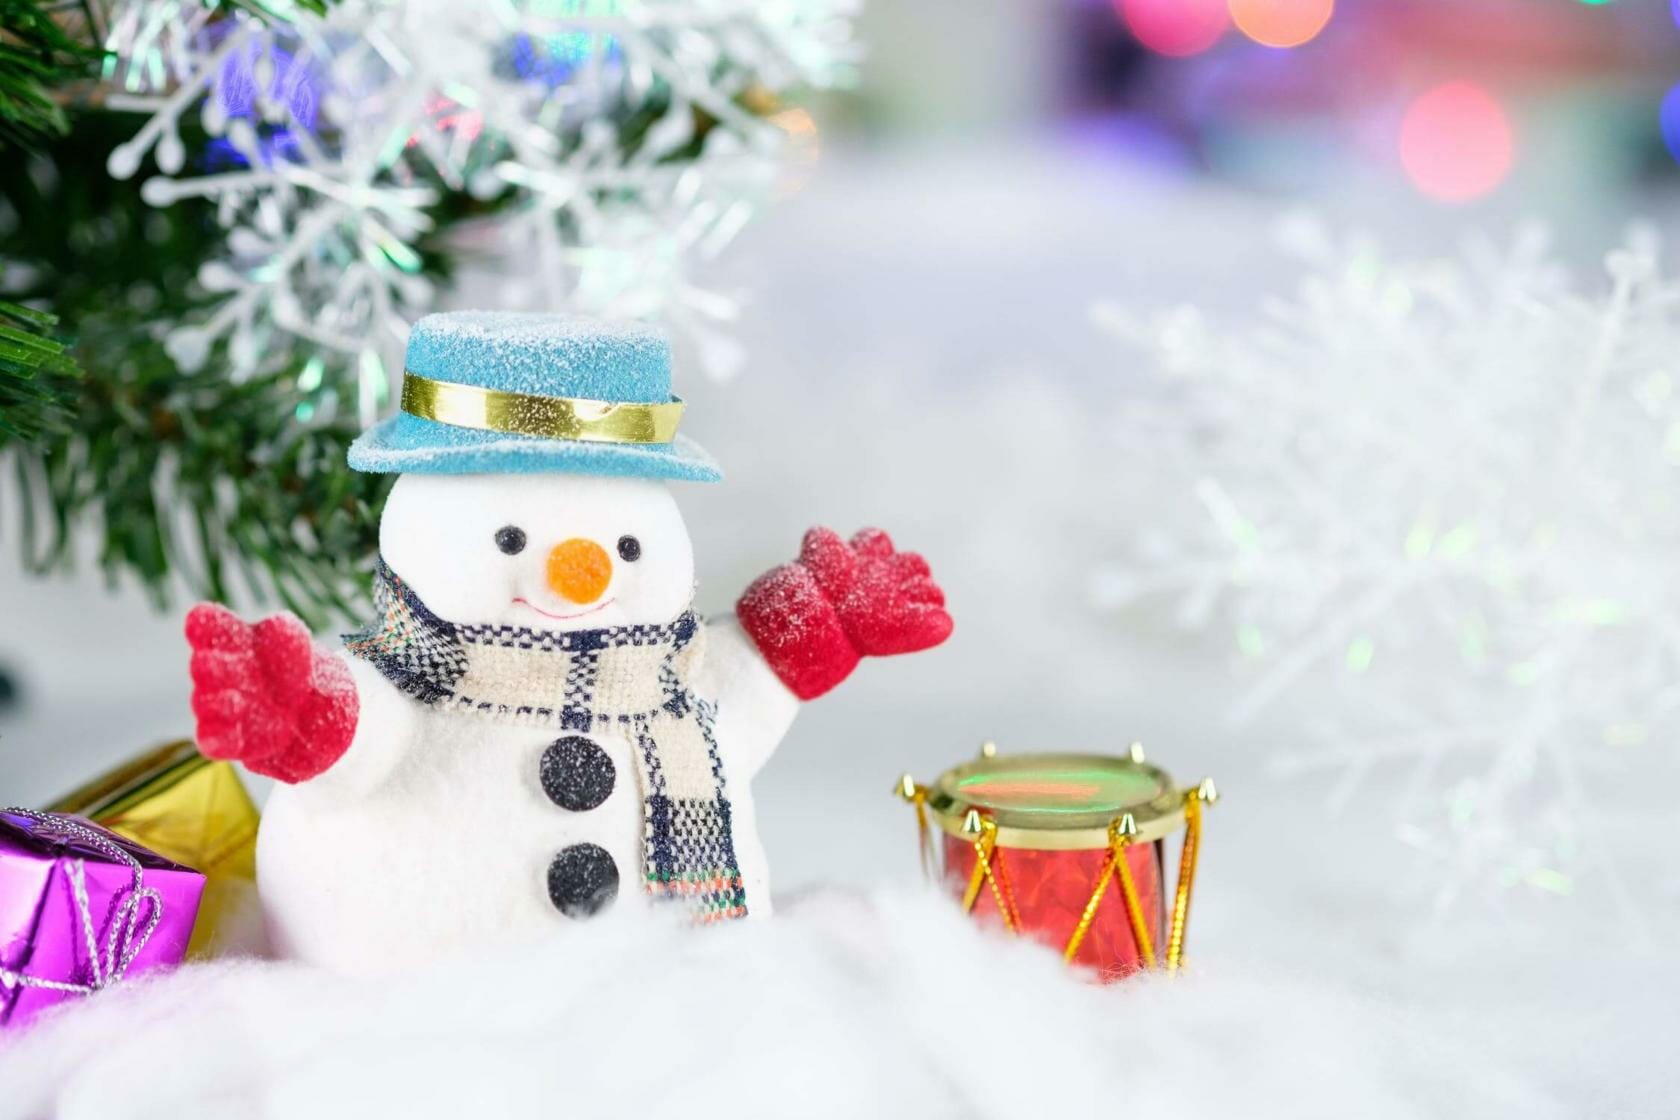 Snowman and drum decorations